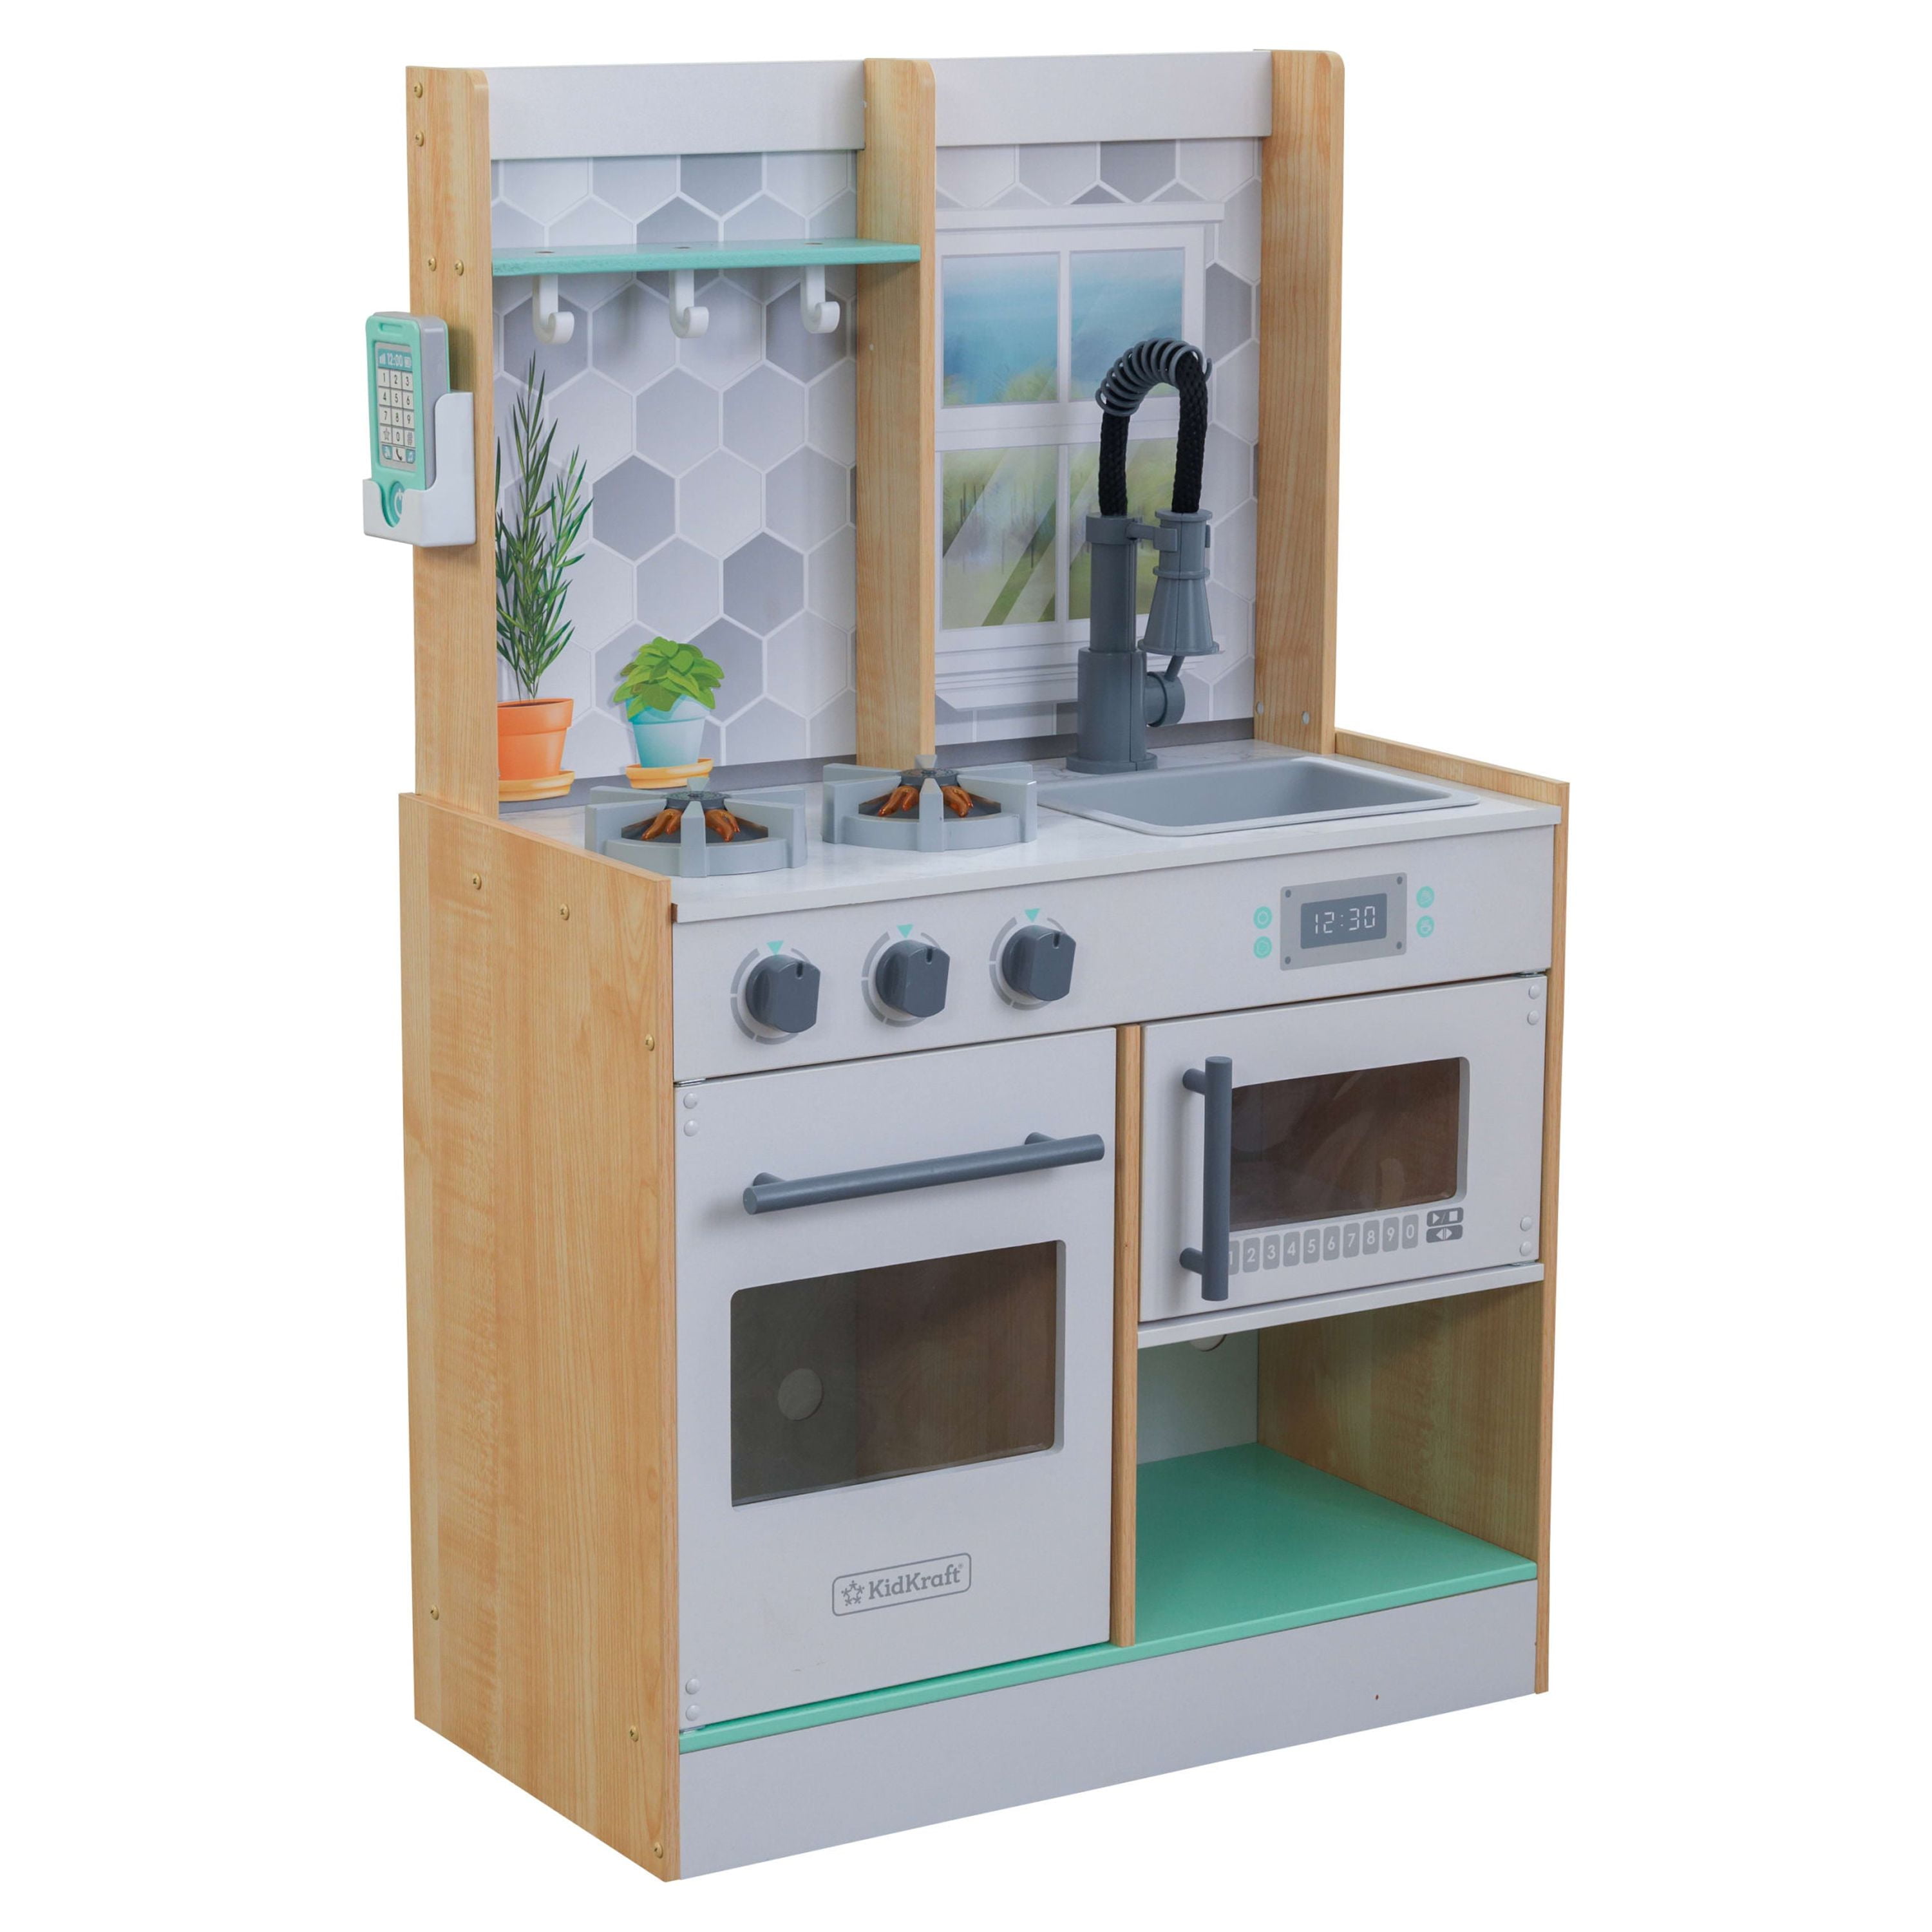 KidKraft Let's Cook Wooden Play Kitchen w/ Lights & Sounds (Natural) $44.76 + Free Shipping